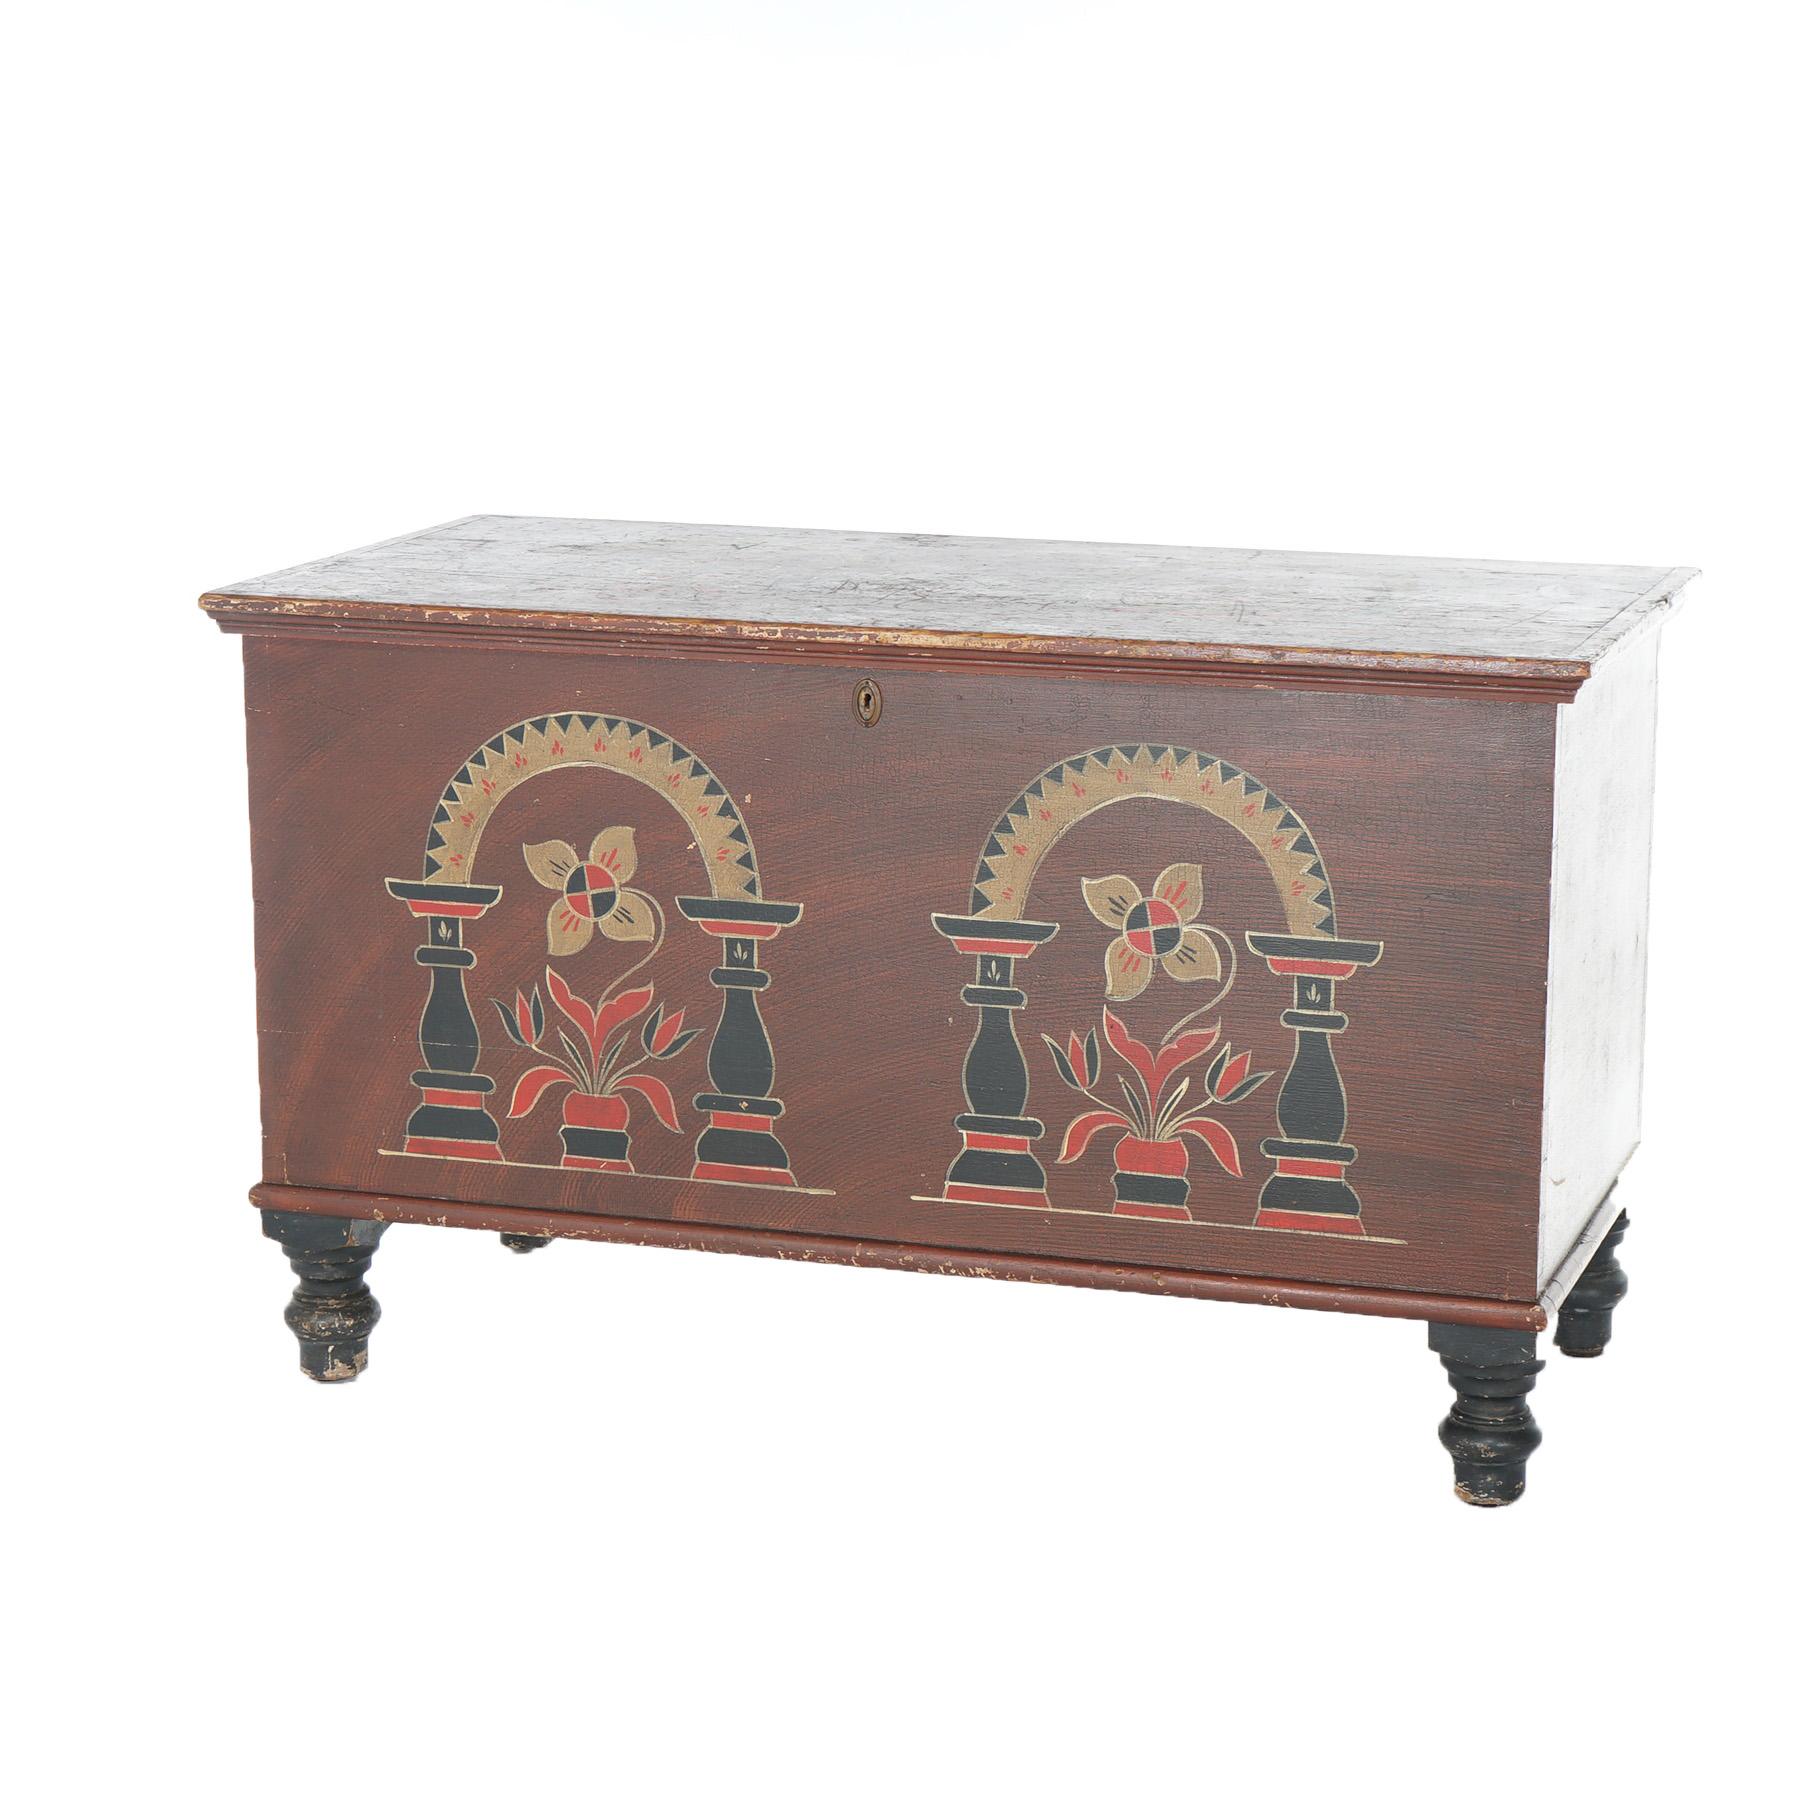 American Antique PA Dutch Lancaster County Stylized Floral Decorated Blanket Chest c1860 For Sale